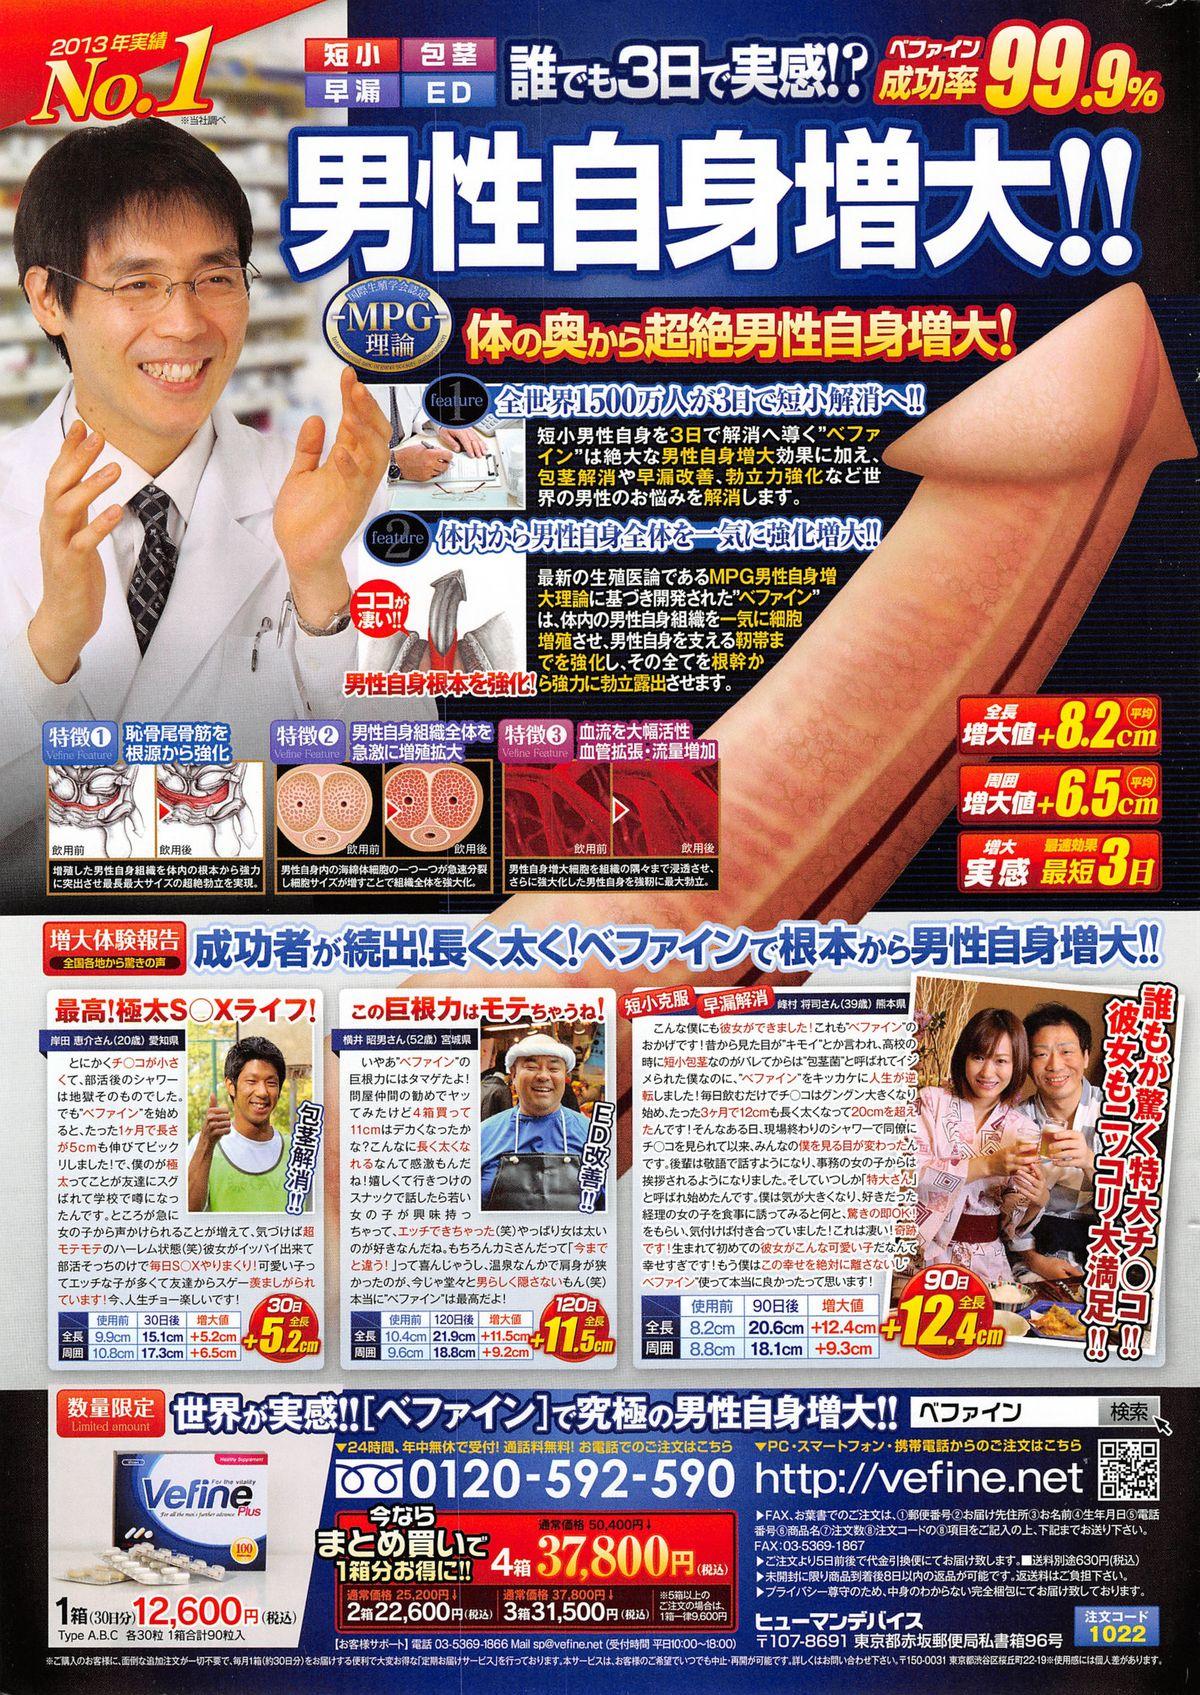 Gay 3some Action Pizazz DX 2015-01 Cute - Page 251